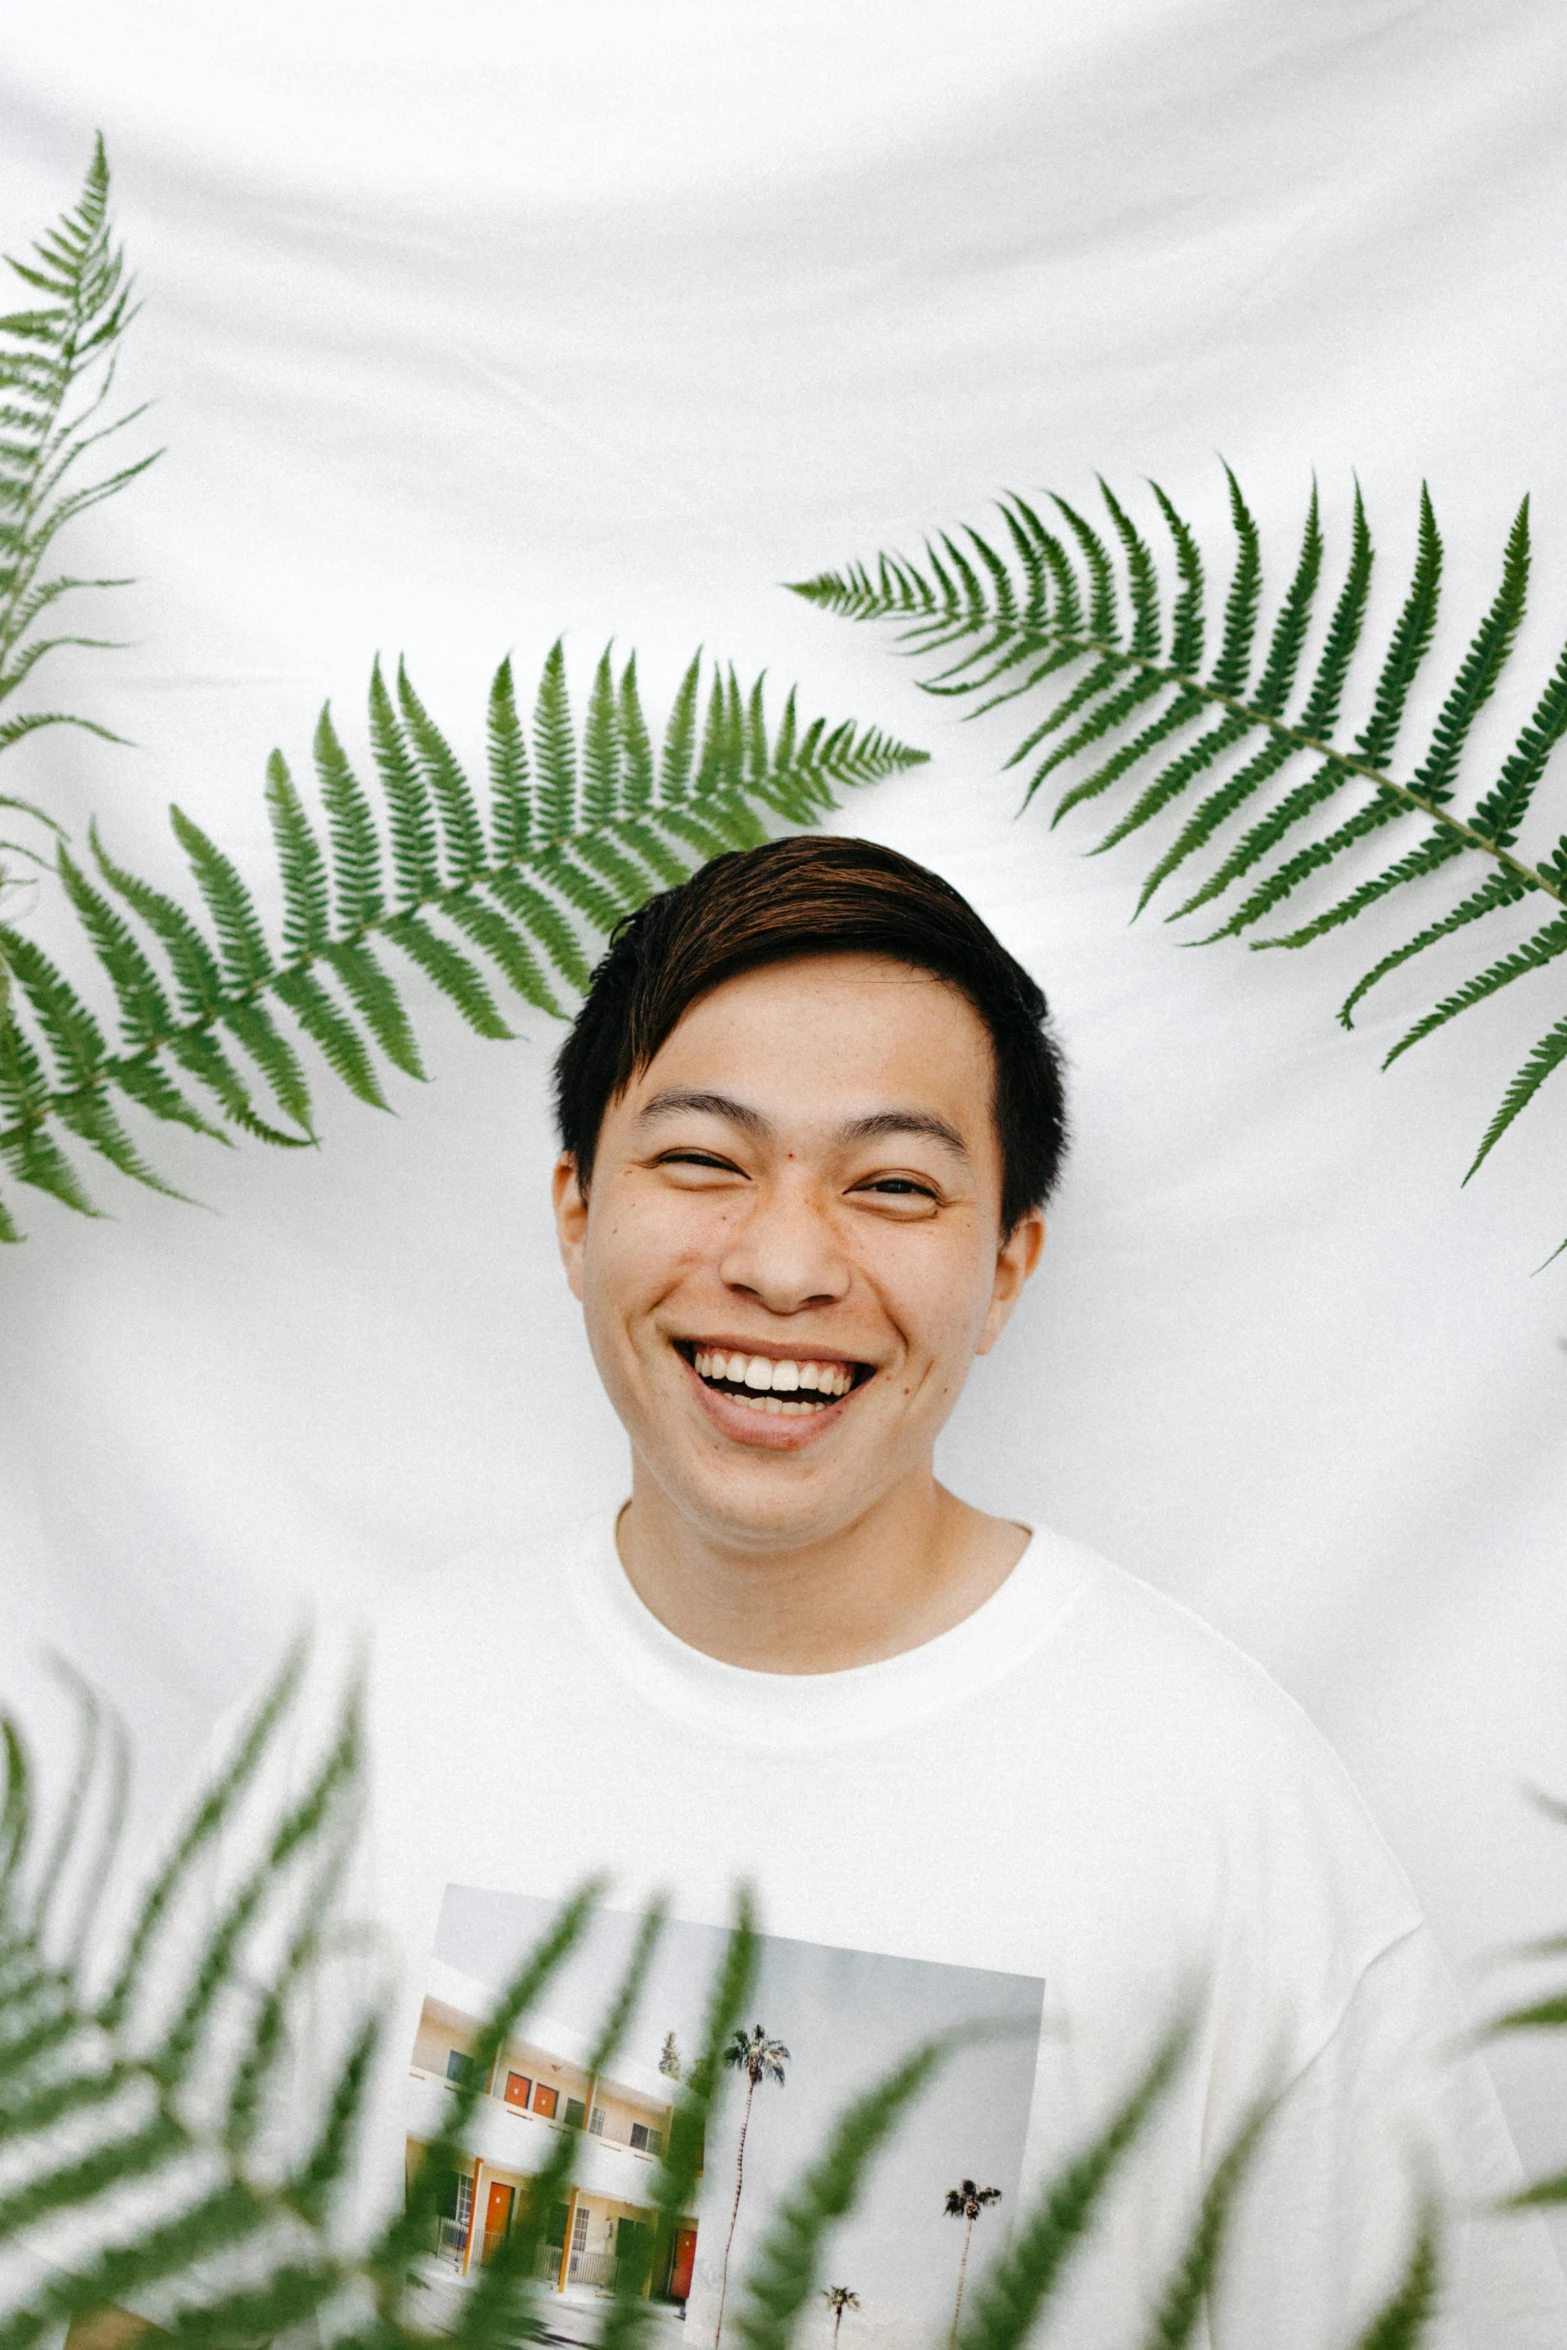 a man that is standing in front of some plants, inspired by Reuben Tam, pexels contest winner, sumatraism, smiling mouth, in front of white back drop, fern, half asian